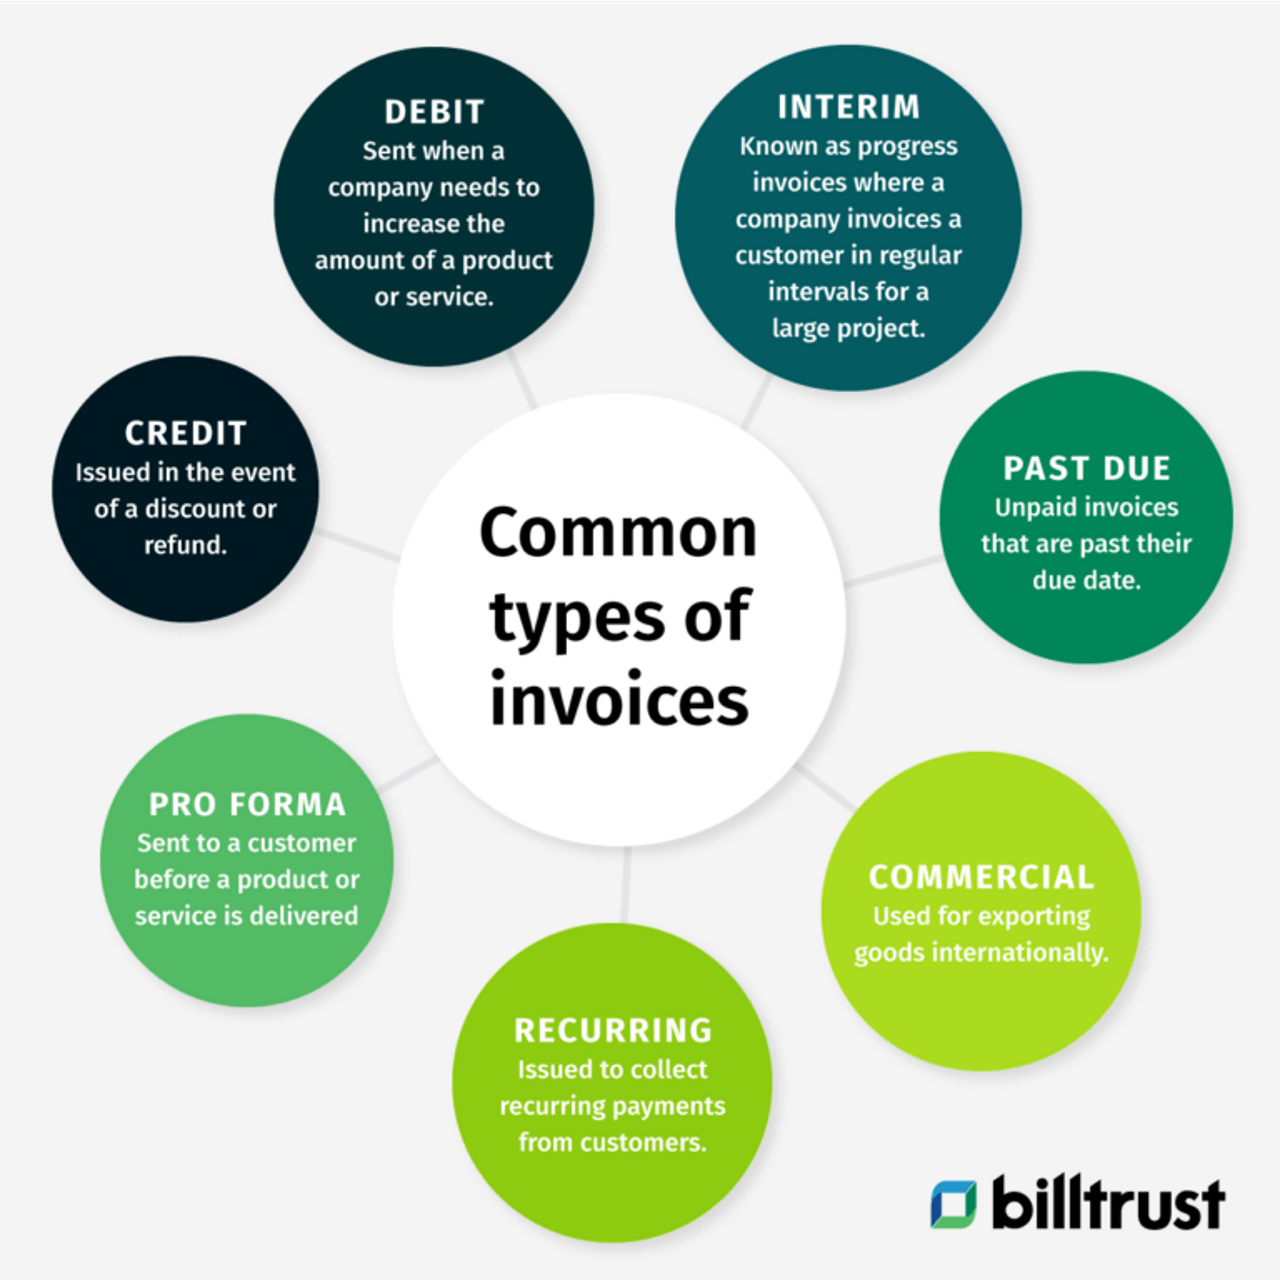 common types of invoices: debit, interim, credit, past due, pro forma, recurring and commercial